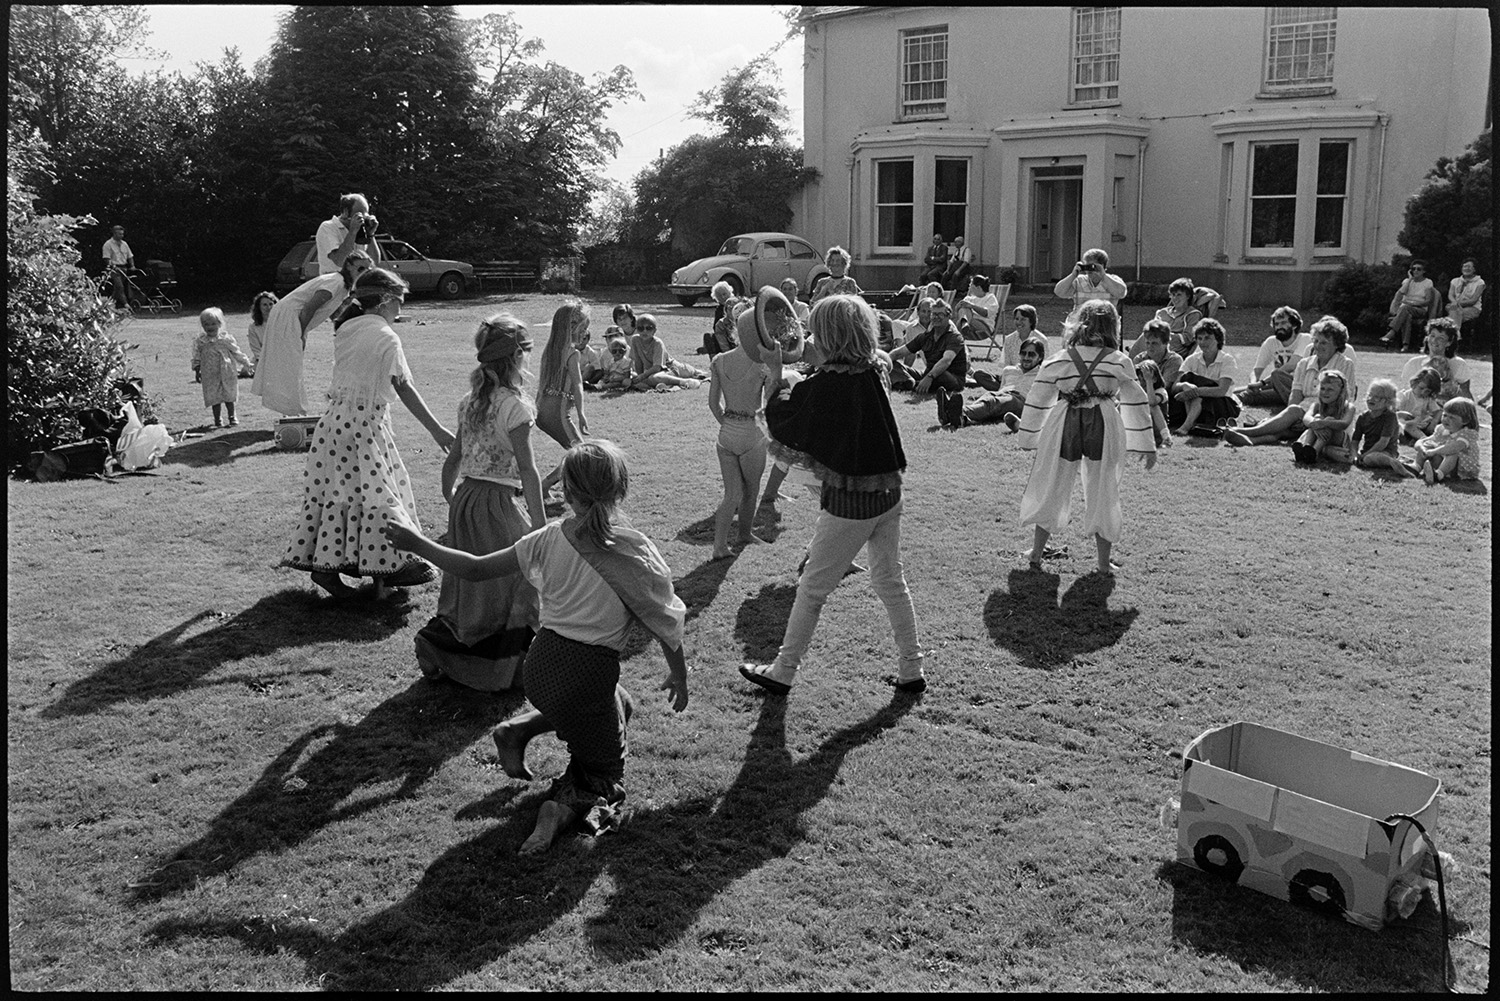 Children's ballet class dance performance on lawn of country house. 
[Children performing a ballet routine to their parents, other adults and children on the lawn in front of Broadwoodkelly Rectory, which can be seen in the background.]